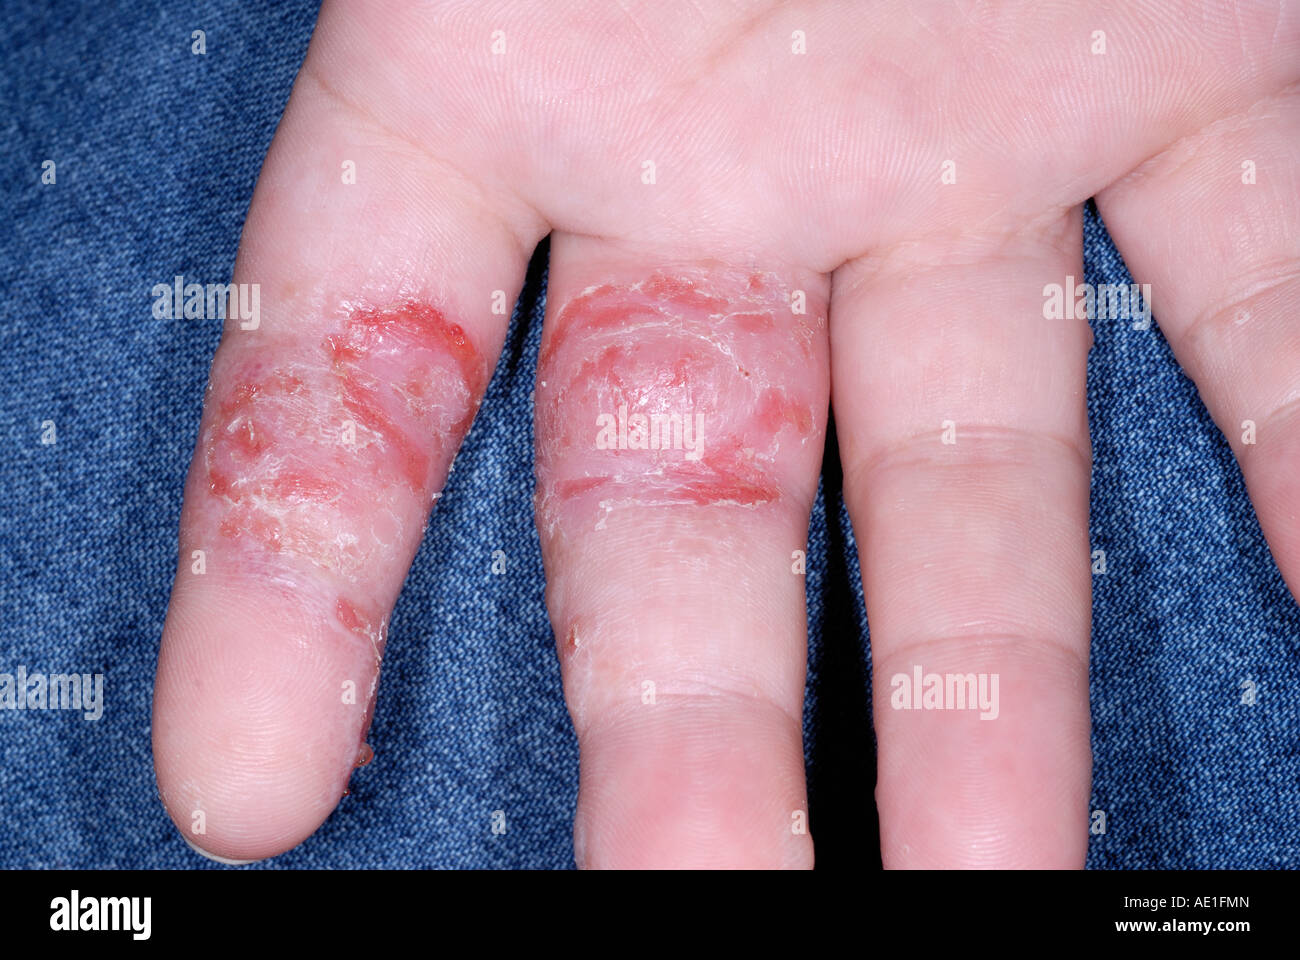 Dyshidrotic eczema on the hand of a 34 year old female Stock Photo